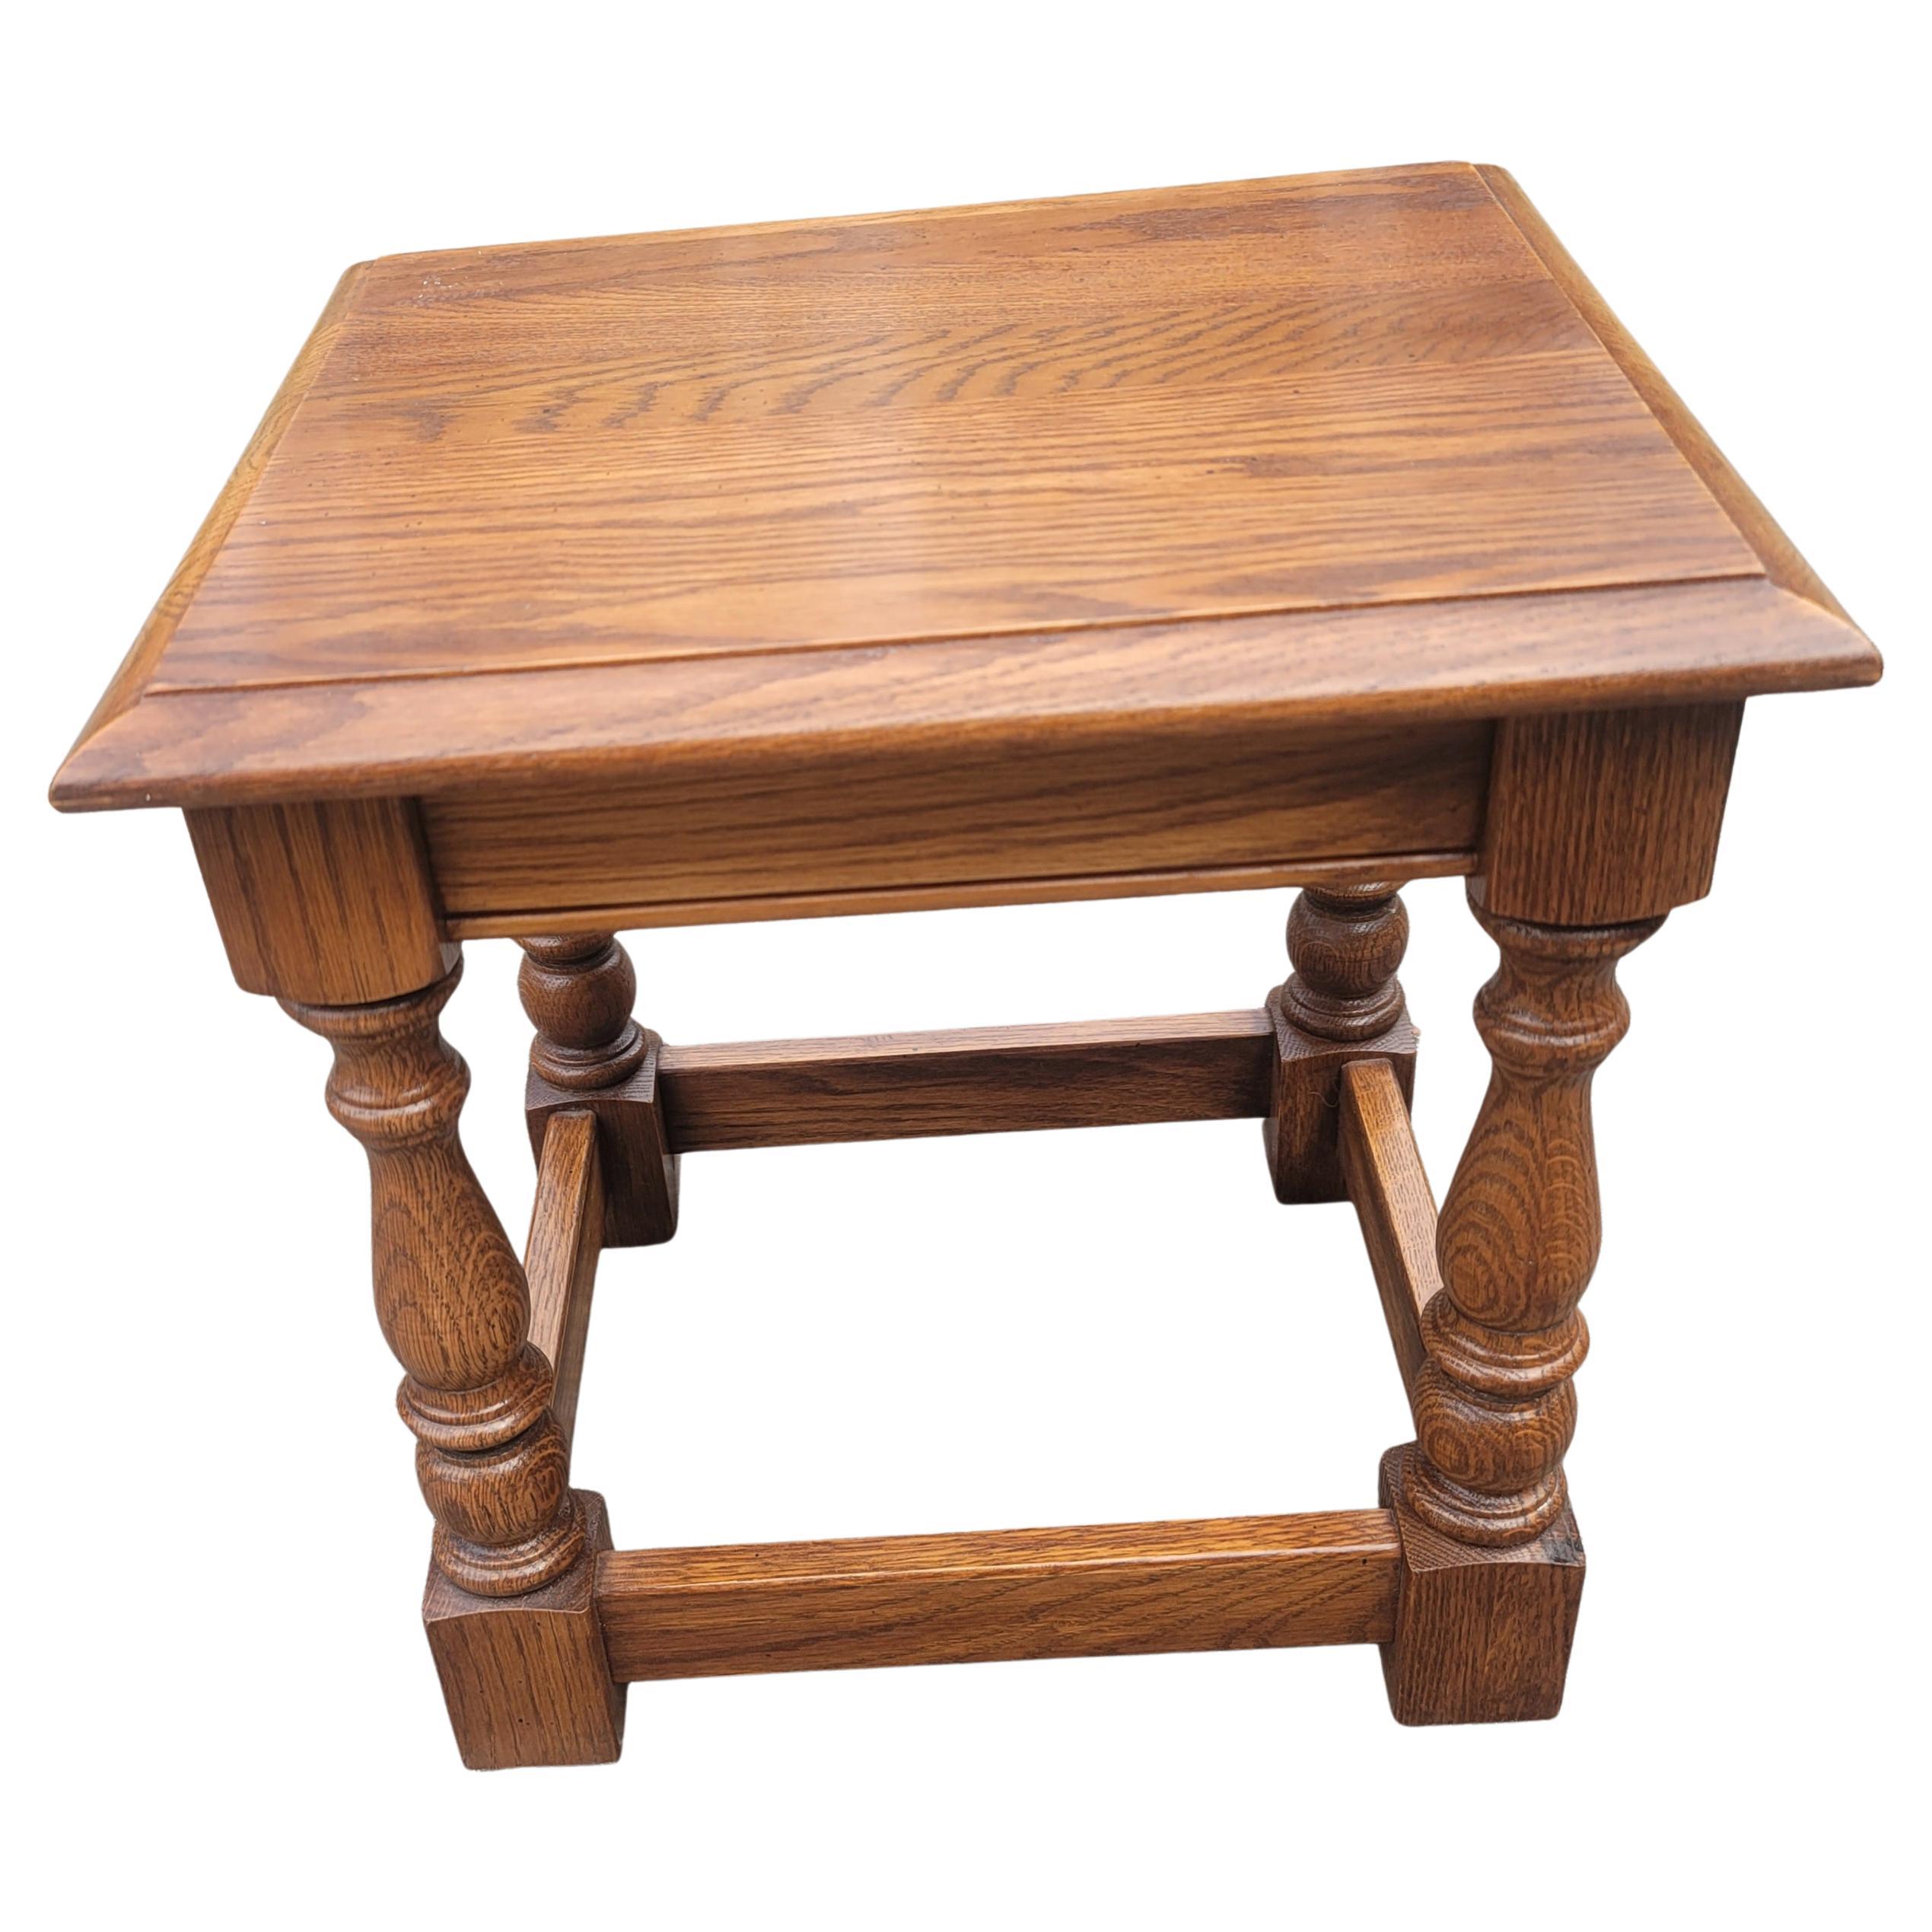 Country View Amish Handcrafted Mission Oak Low Stools In Good Condition For Sale In Germantown, MD